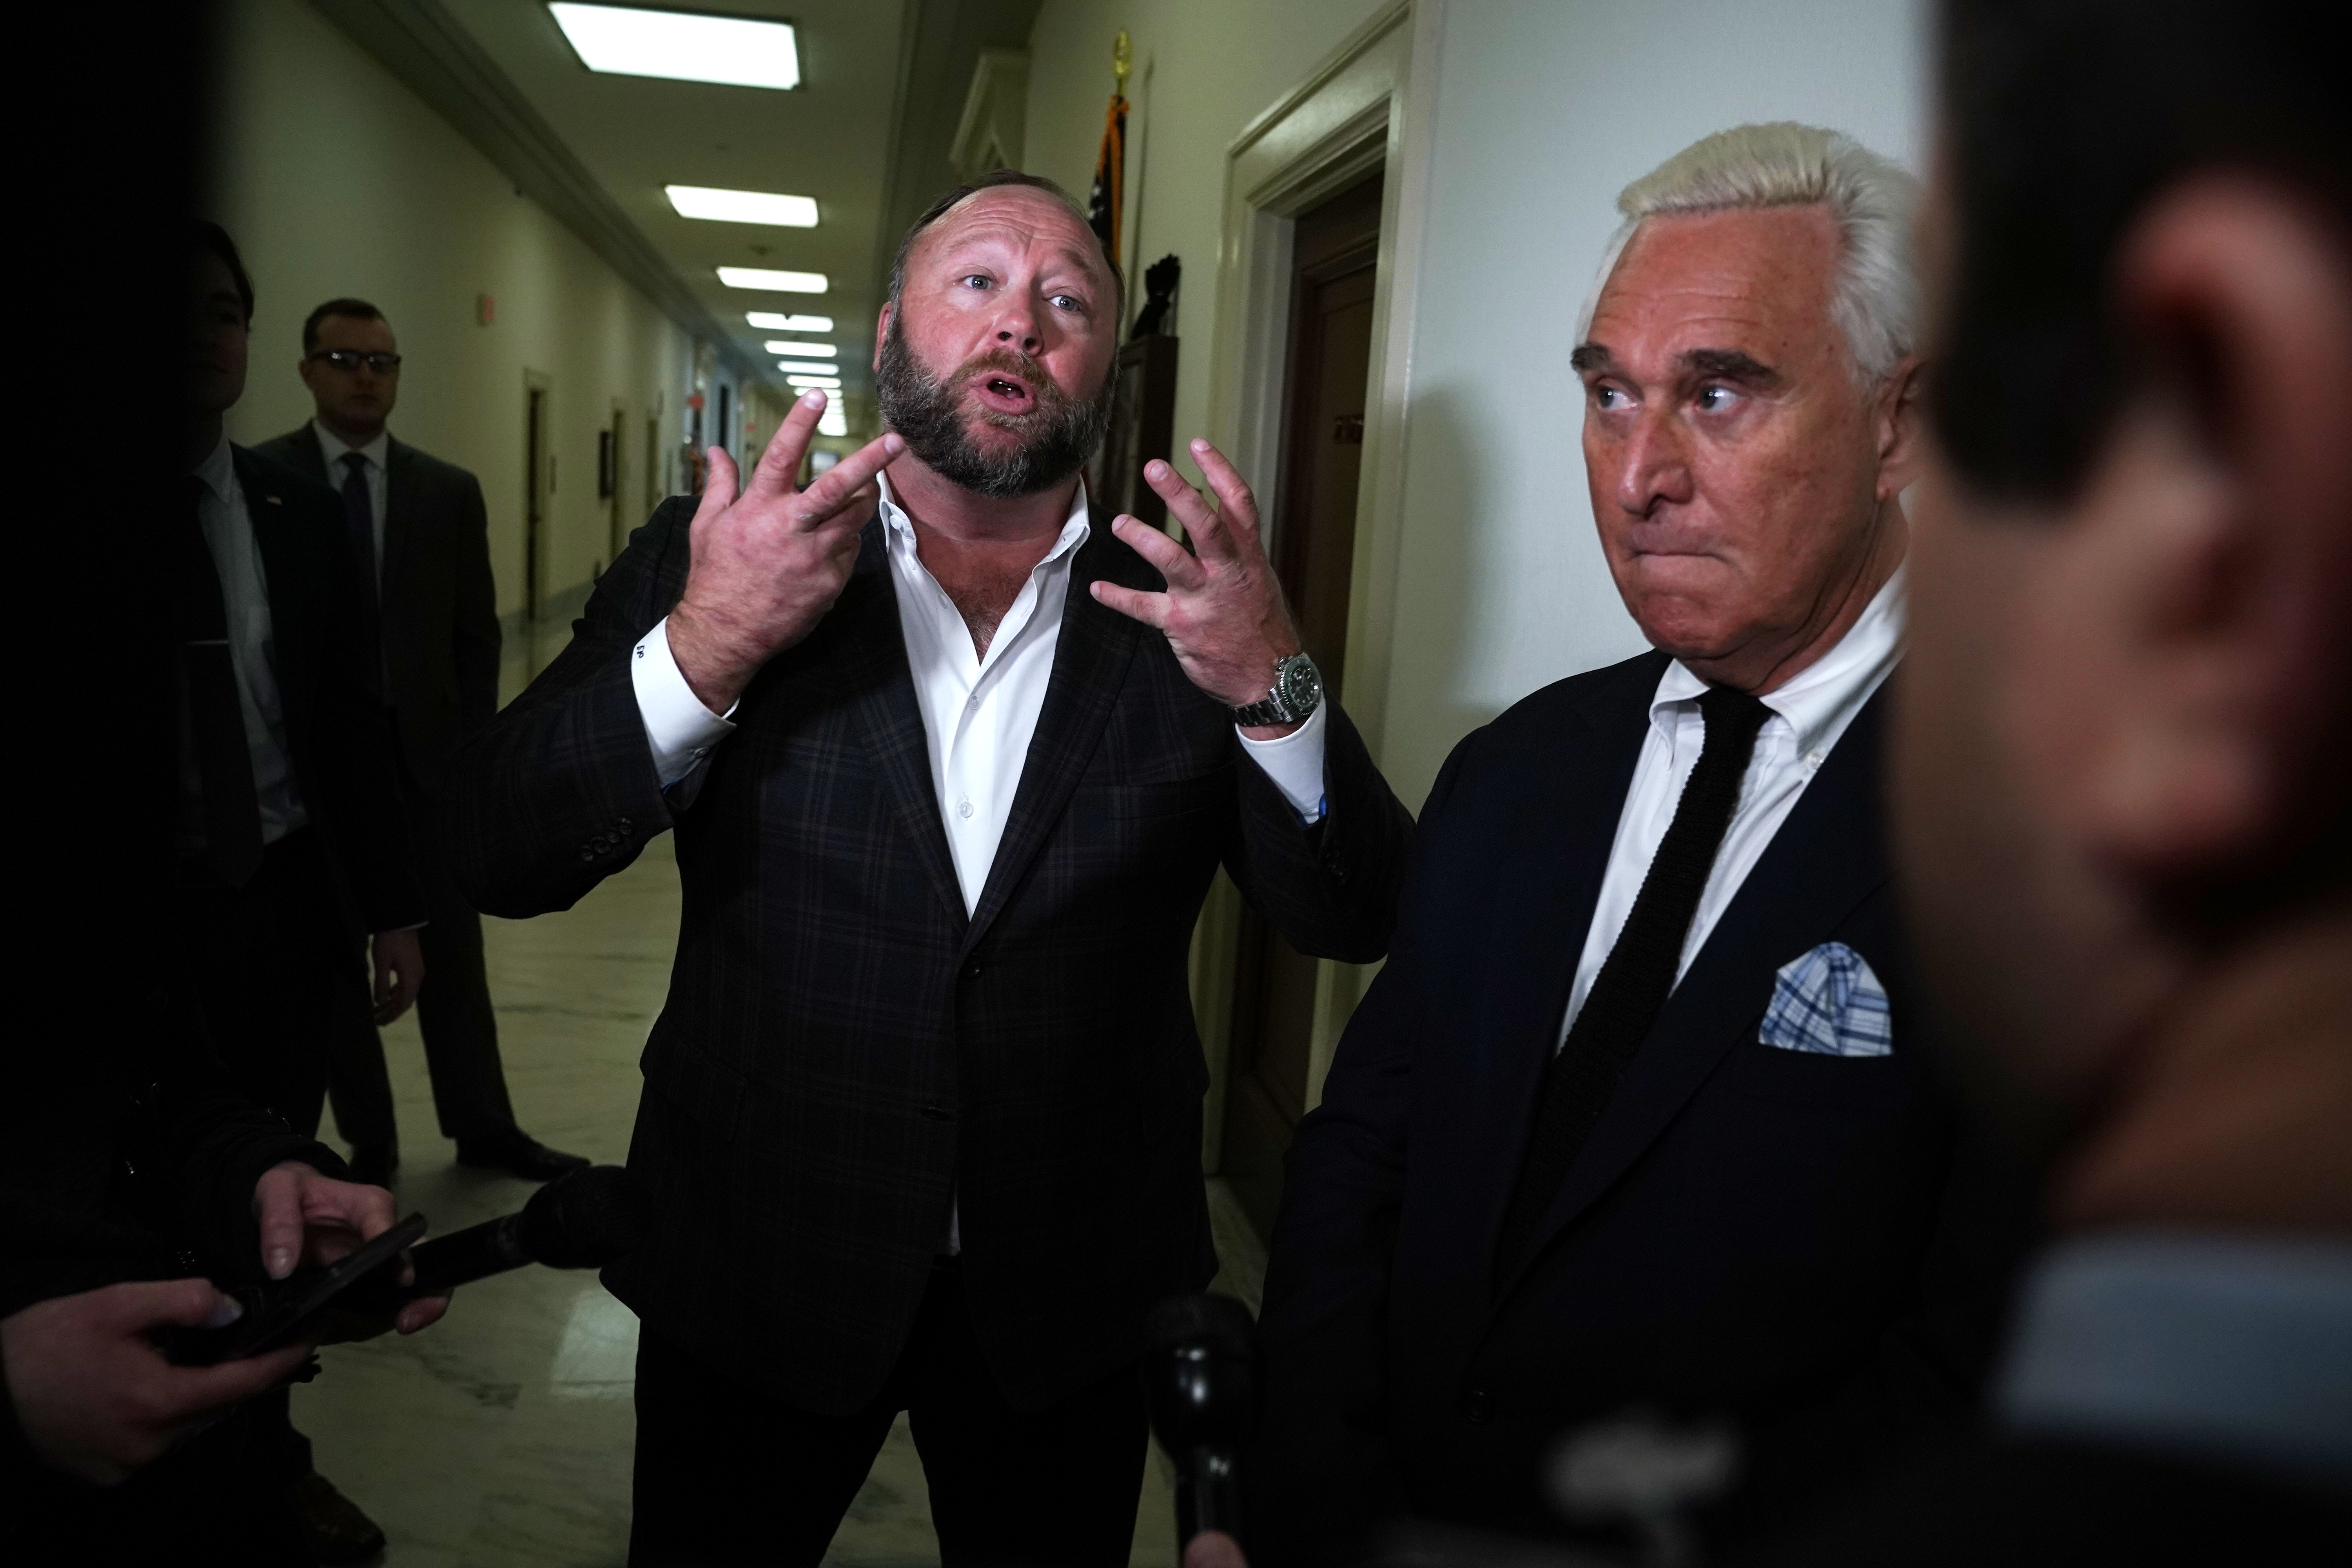 WASHINGTON, DC - DECEMBER 11: Longtime informal adviser to President Trump Roger Stone (R) and Alex Jones (L) of Infowars speak to cameras outside a hearing where Google CEO Sundar Pichai testified before the House Judiciary Committee at the Rayburn House Office Building on December 11, 2018 in Washington, DC. The committee held a hearing on 'Transparency & Accountability: Examining Google and its Data Collection, Use and Filtering Practices.” (Photo by Alex Wong/Getty Images)